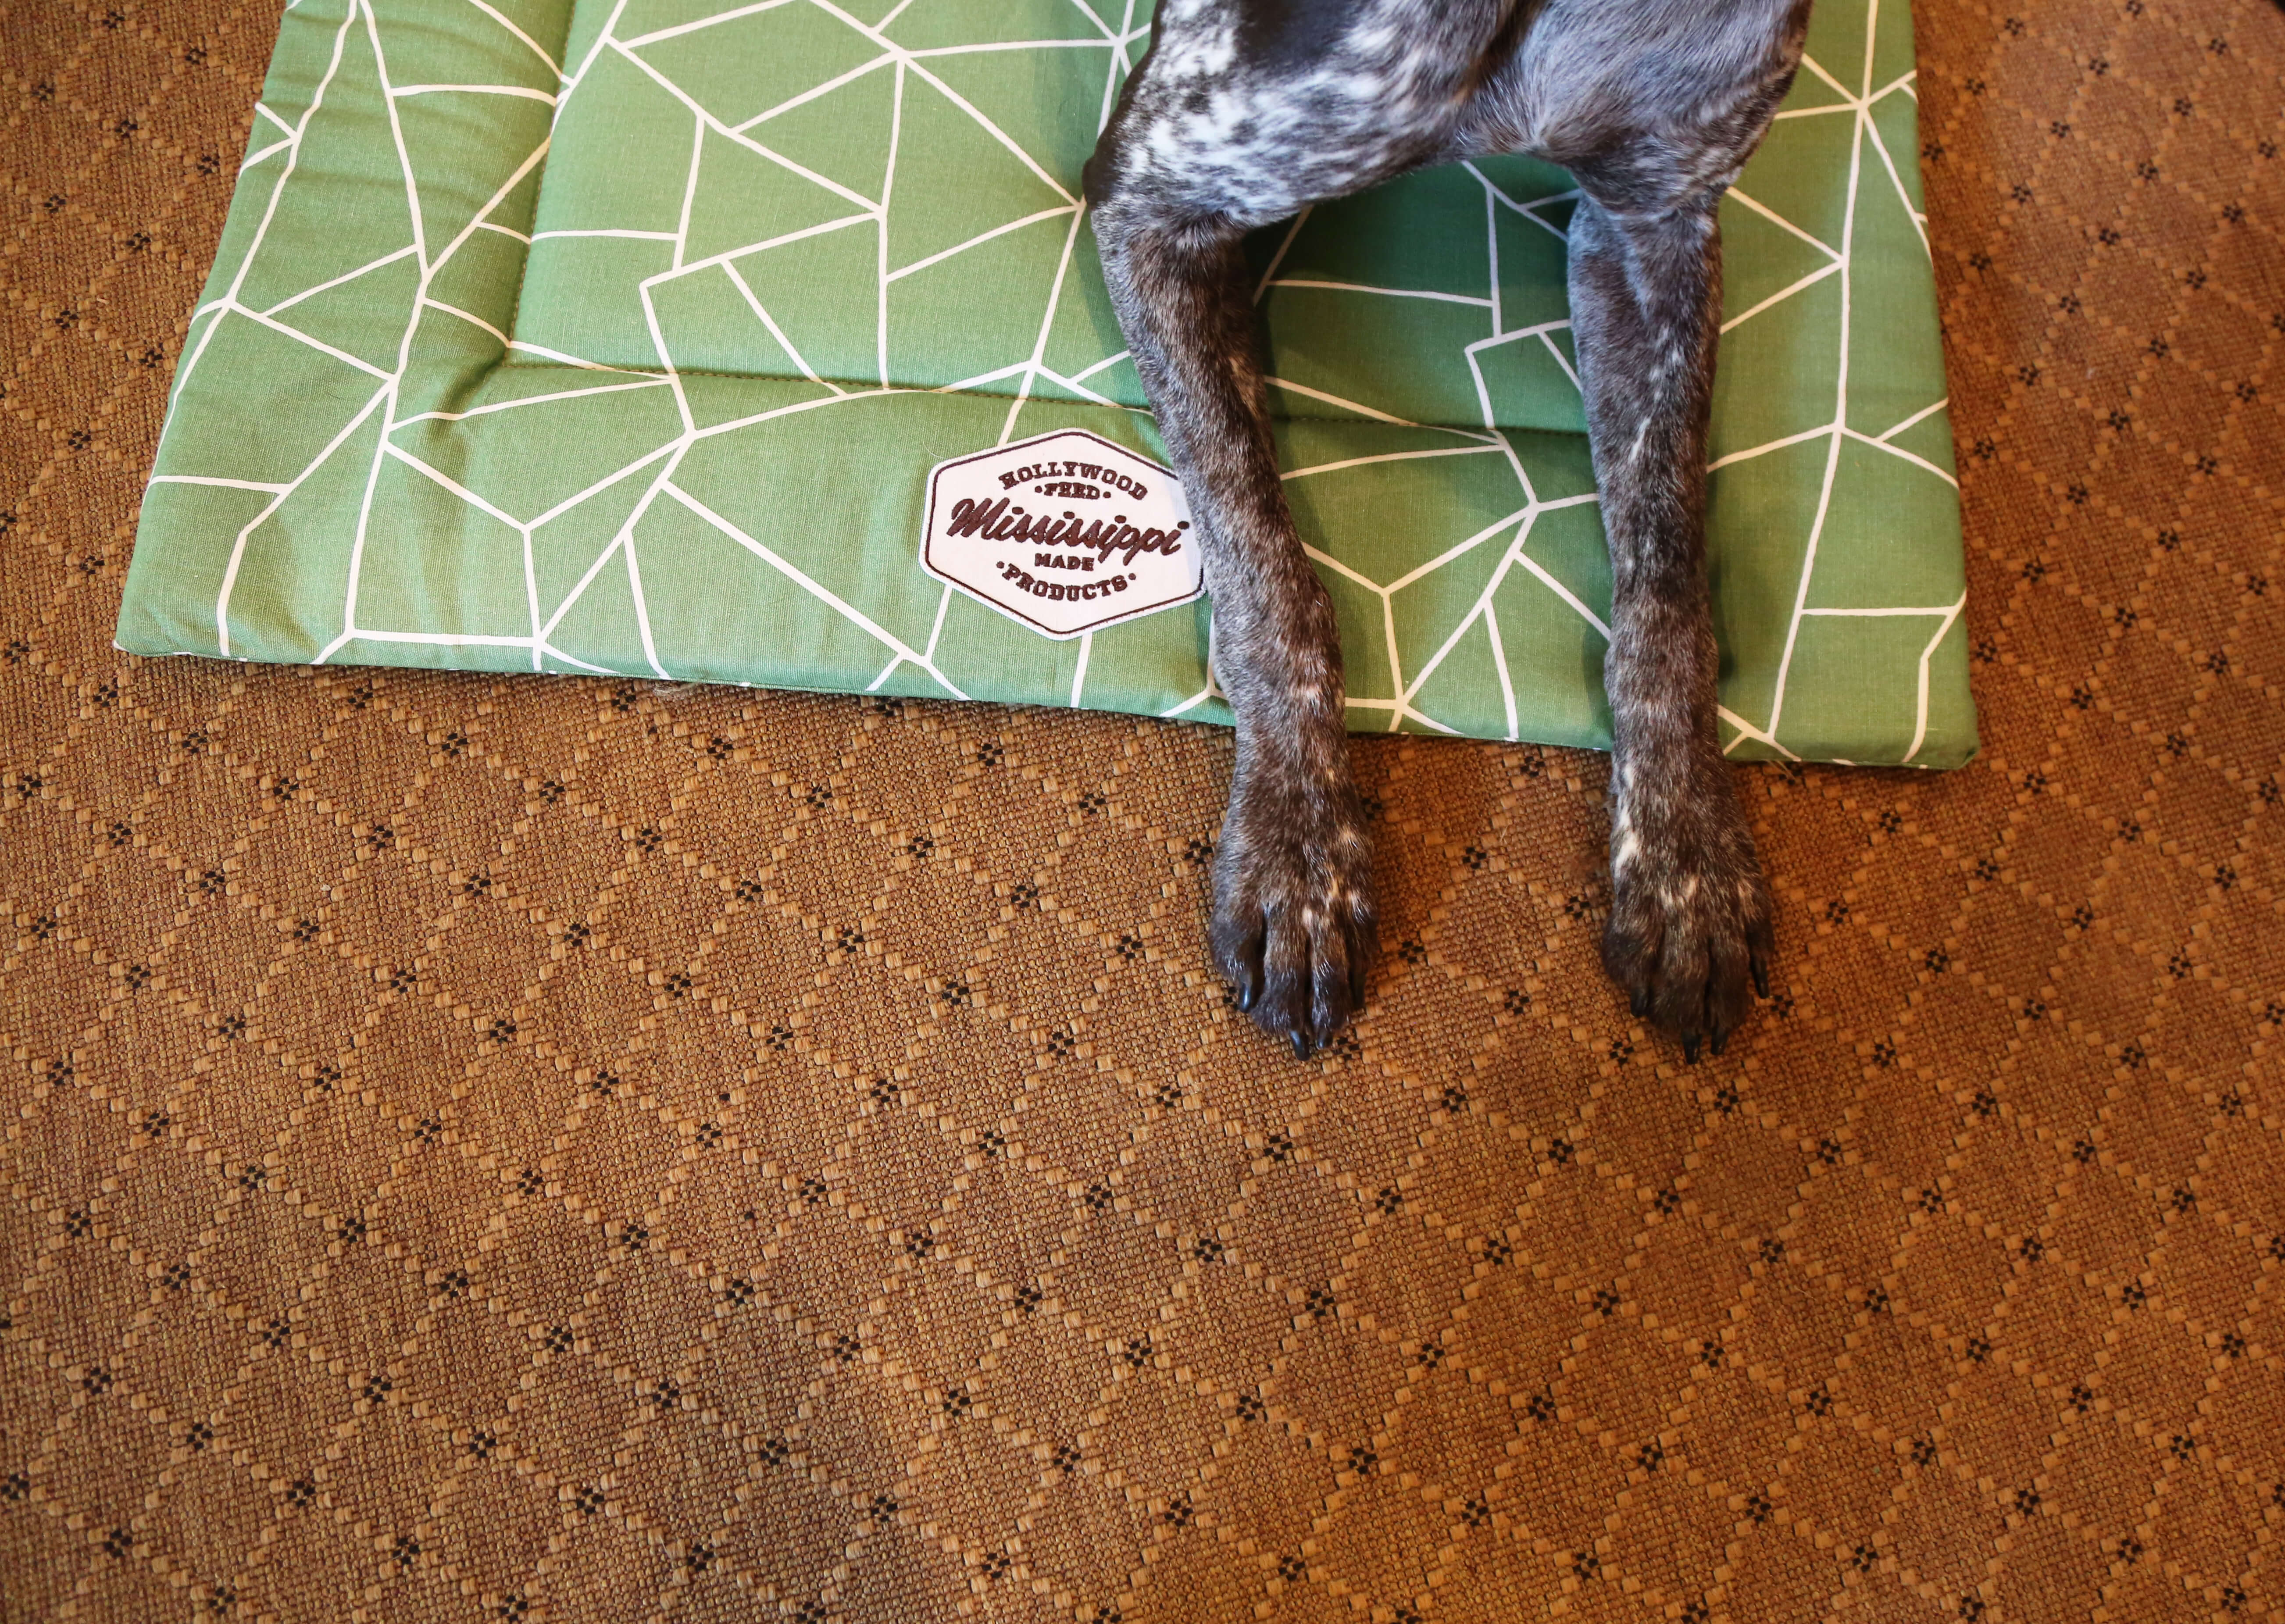 Dog laying on hollywood feed mississippi made snoozepad - cut glass